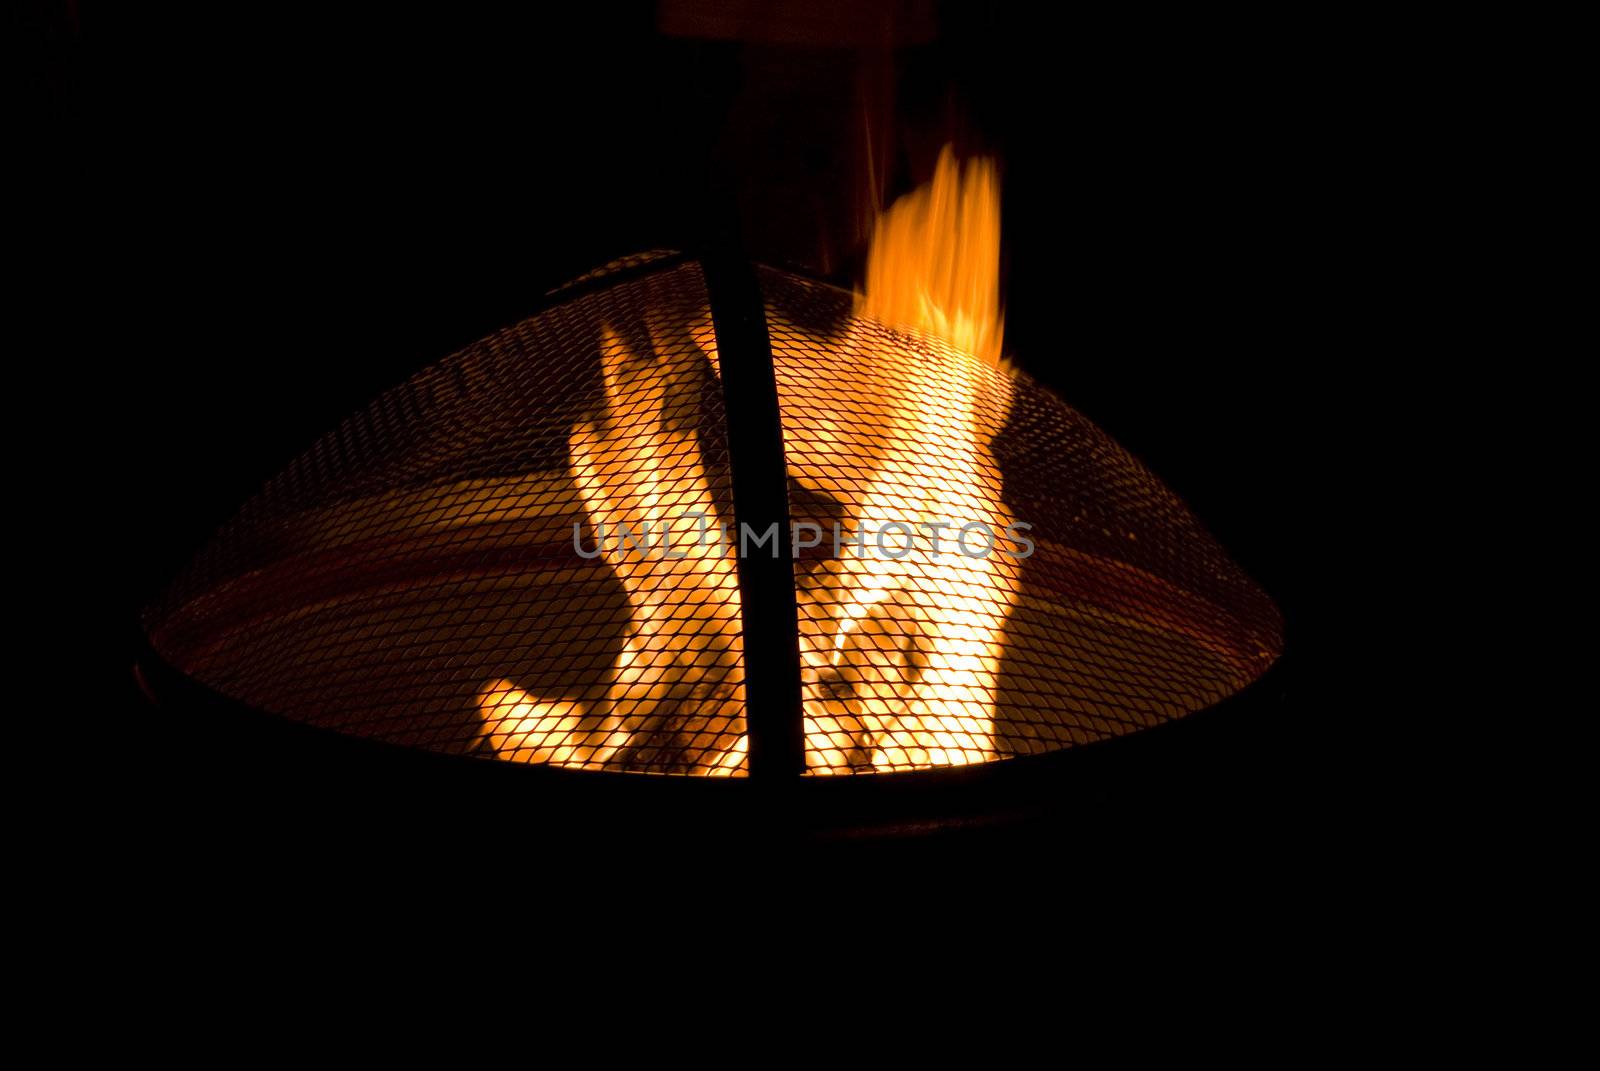 A shot of a blazing hot fire bowl.  Fire tables and bowl have been one of the most popular patio items in the US in recent years.